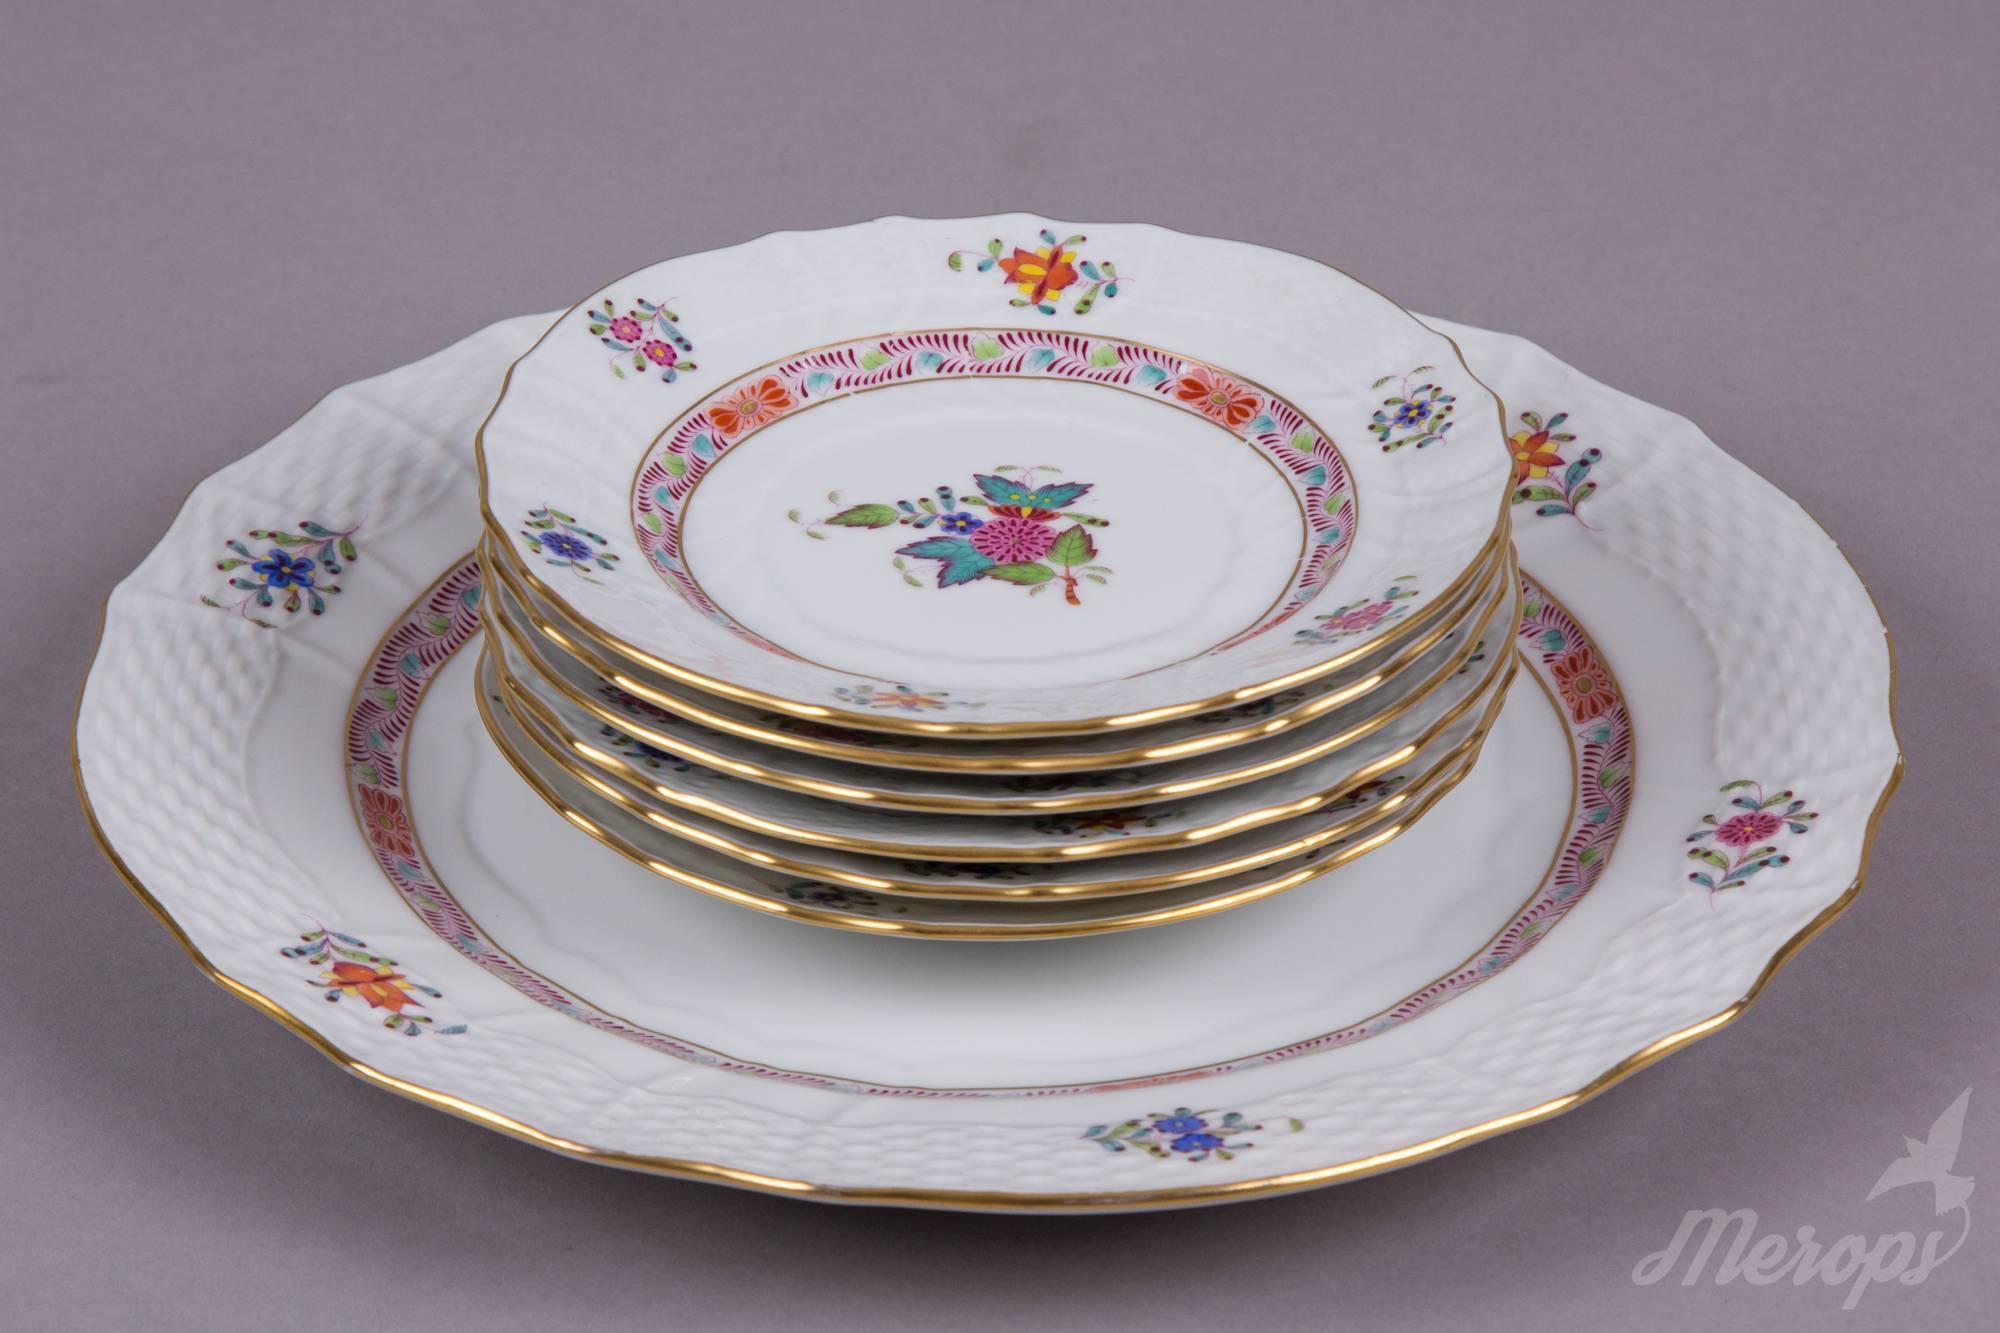 We ship this item worldwide for 70 USD with insurance. Shipping takes 3-7 business days.

Manufacturer:	Herend Porcelain Manufactory (Hungary)
Quality:	Handpainted, 1st class
Pattern:	Chinese Bouquet Fleur (AF)
Condition:	Pre-owned, used, in